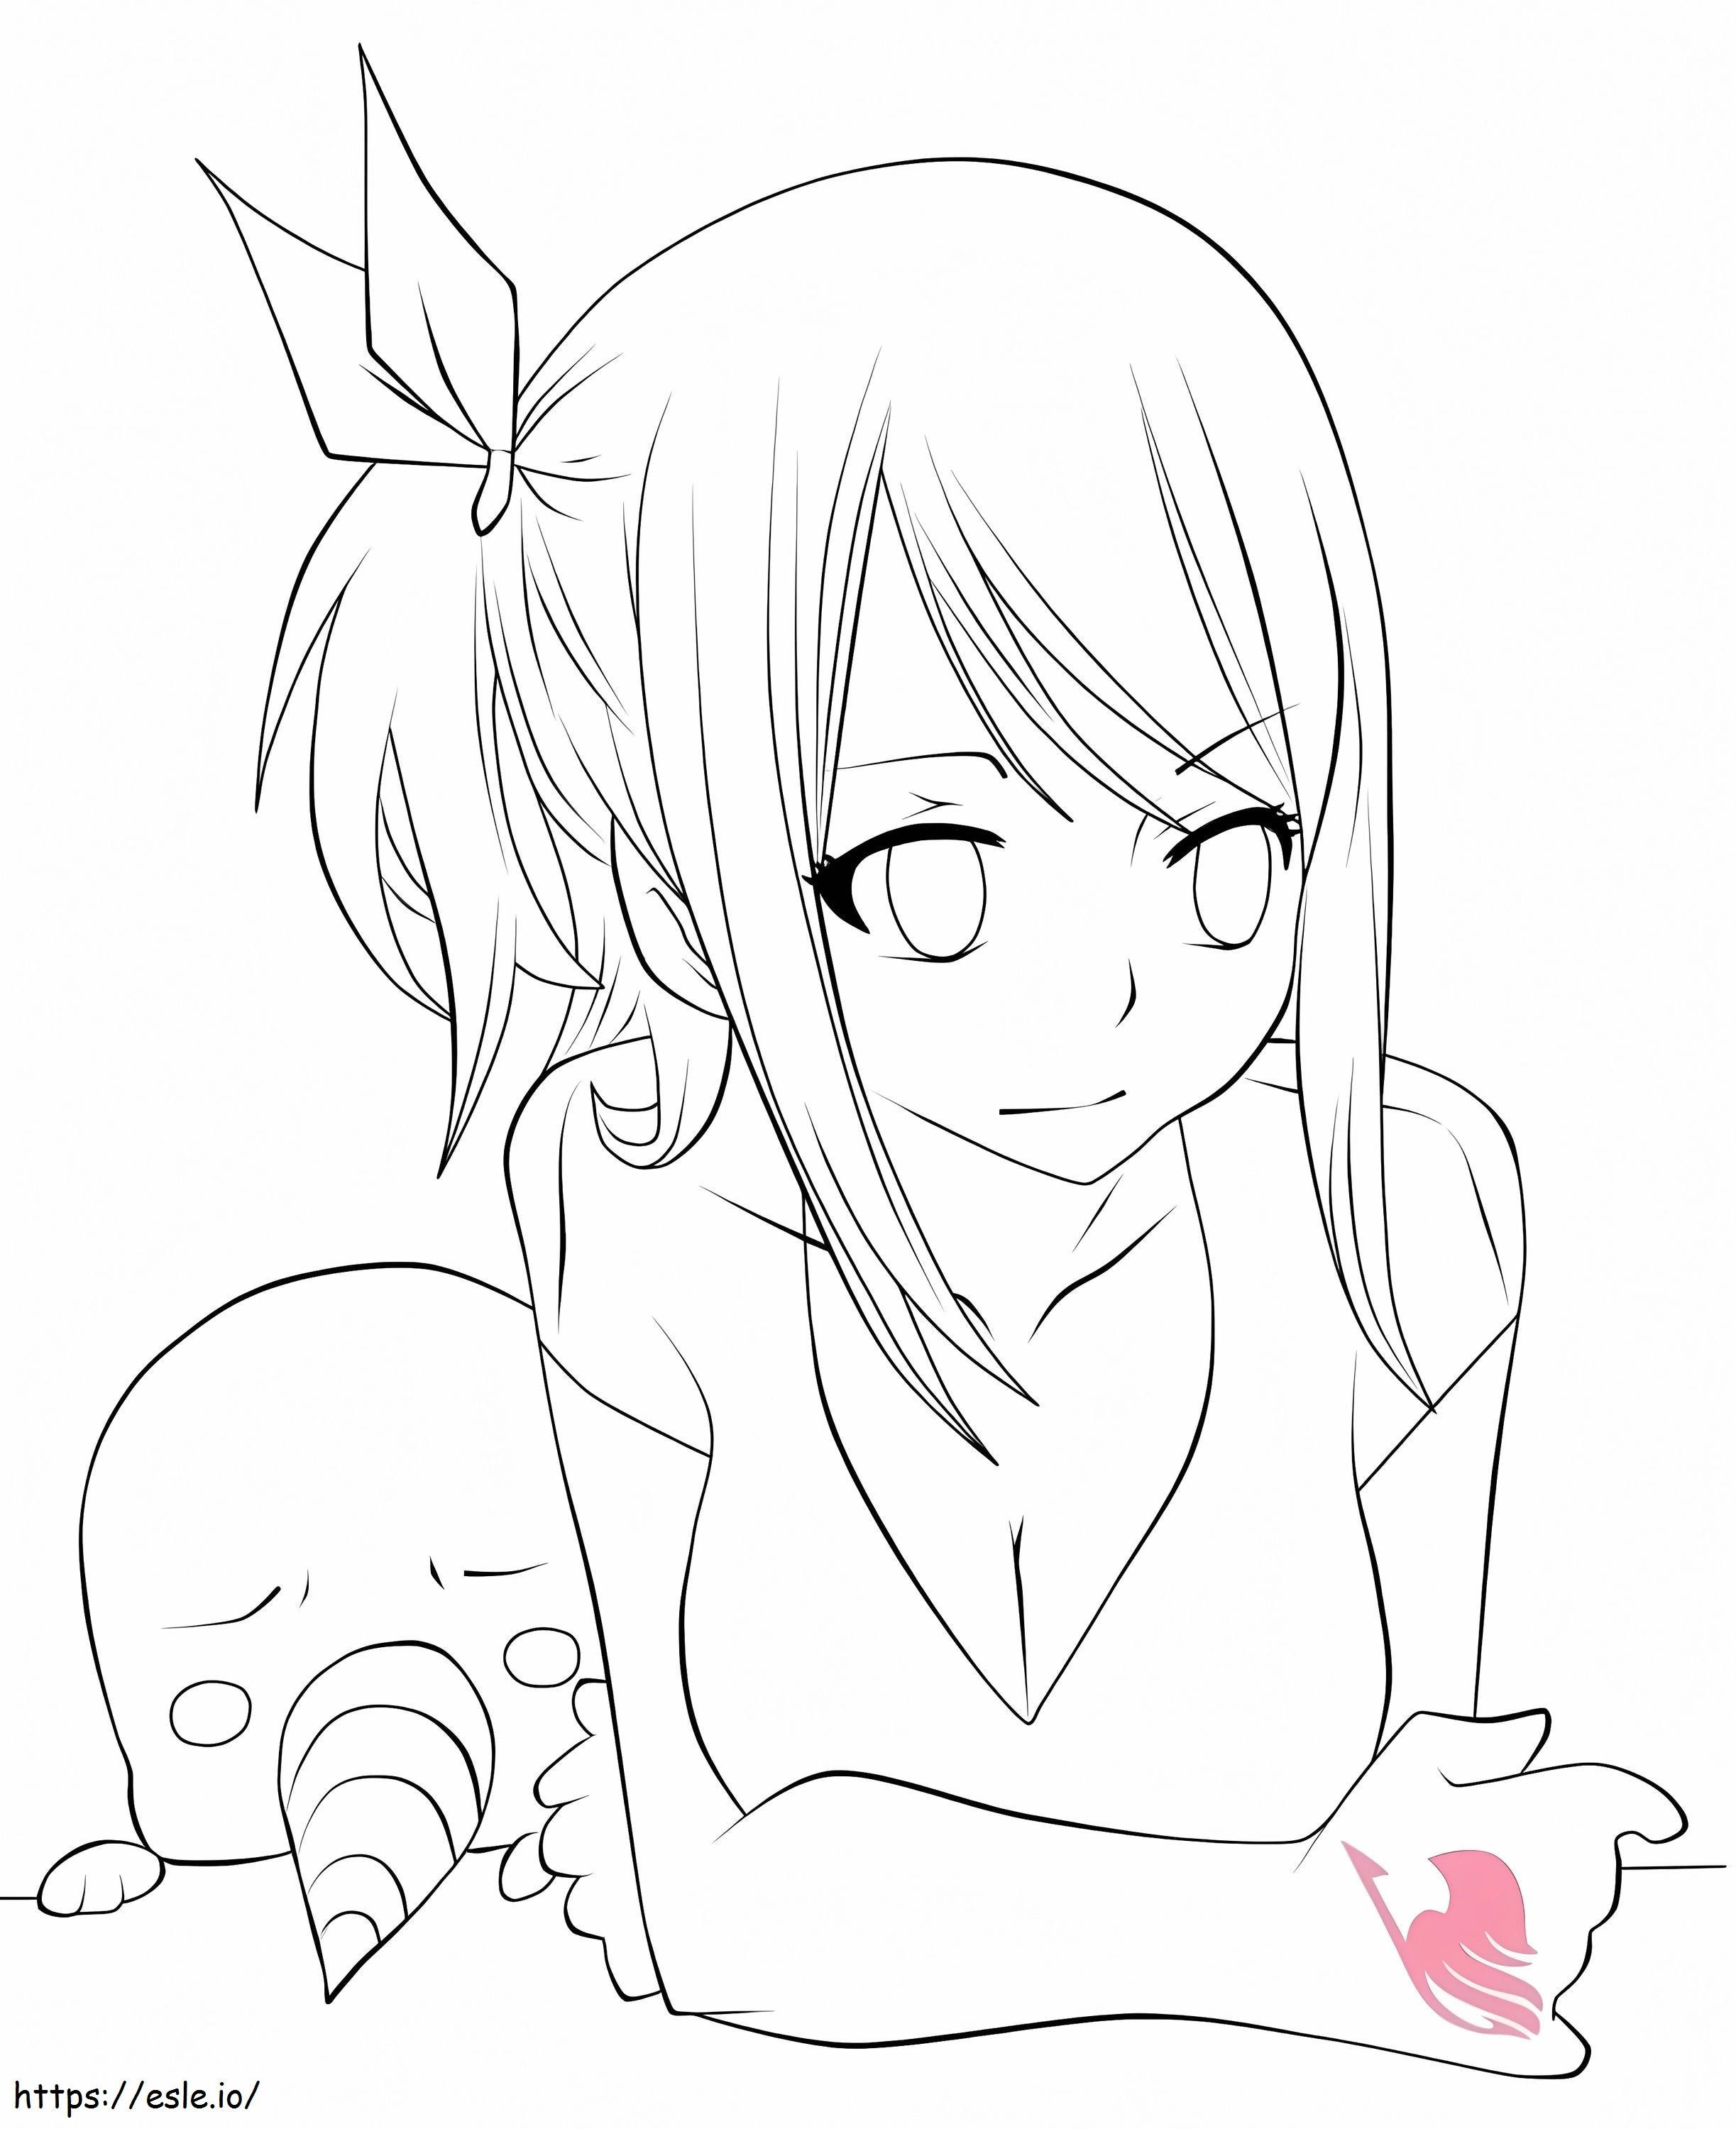 Sad Lucy coloring page